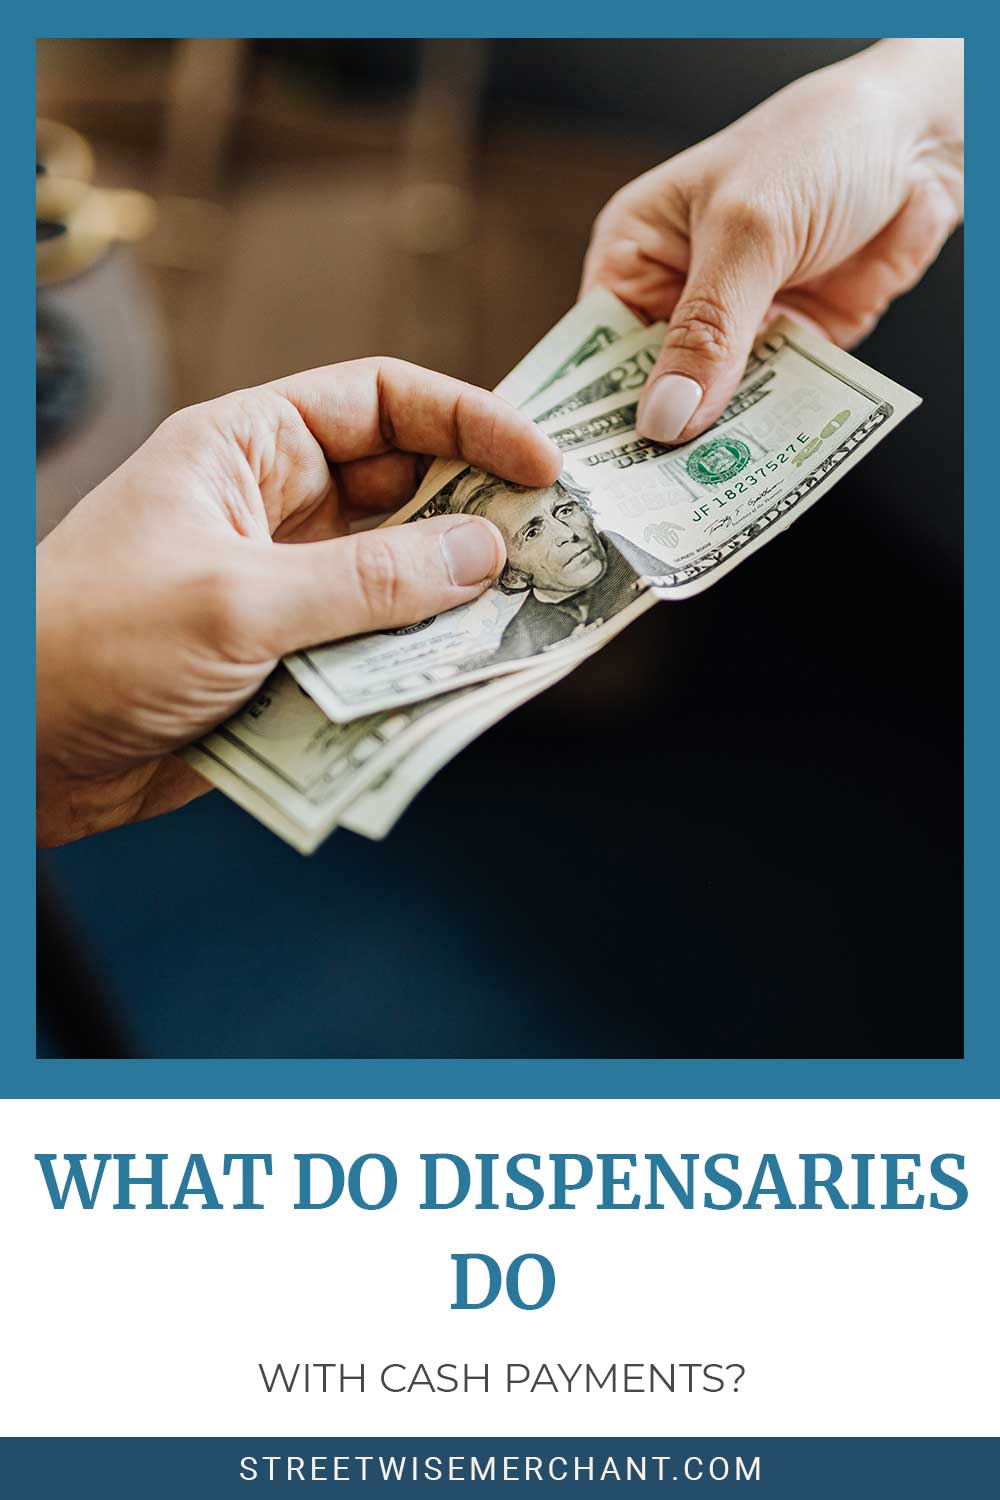 Cash being hander over - What do Dispensaries Do With Cash Payments?